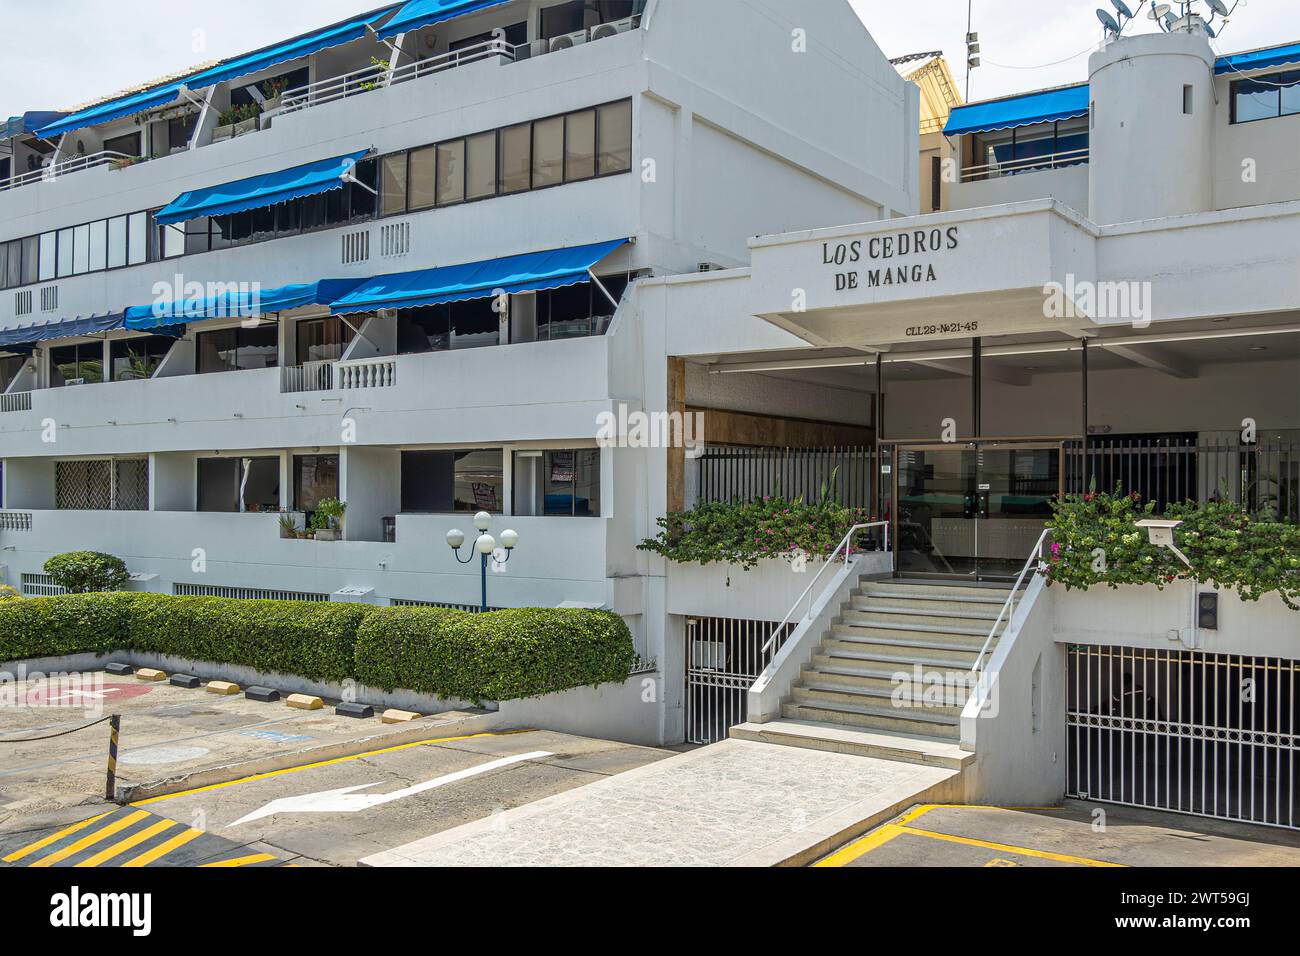 Cartagena, Colombia - July 25, 2023: Los Cedros de Manga upscale apartment building along Calle 29. Gray facade with blue awnings and green foliage Stock Photo